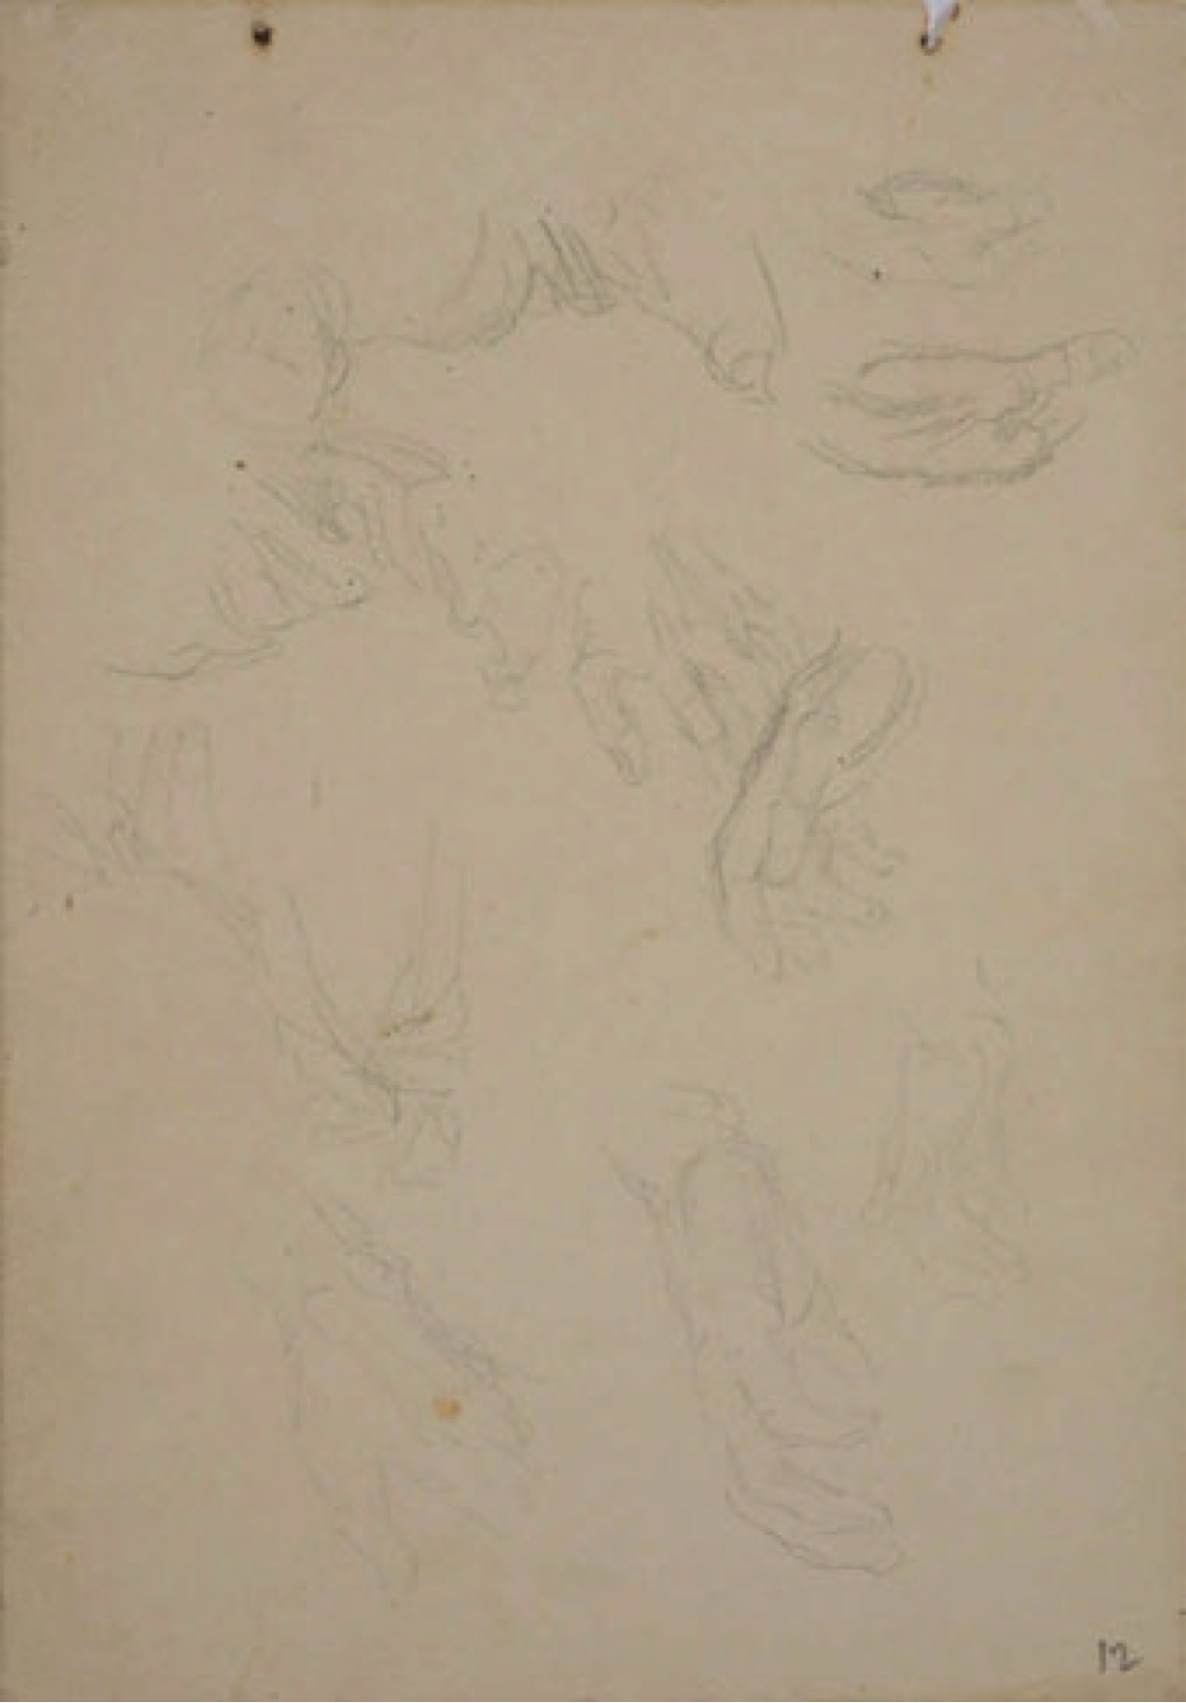 Collections of Drawings antique (10504).jpg